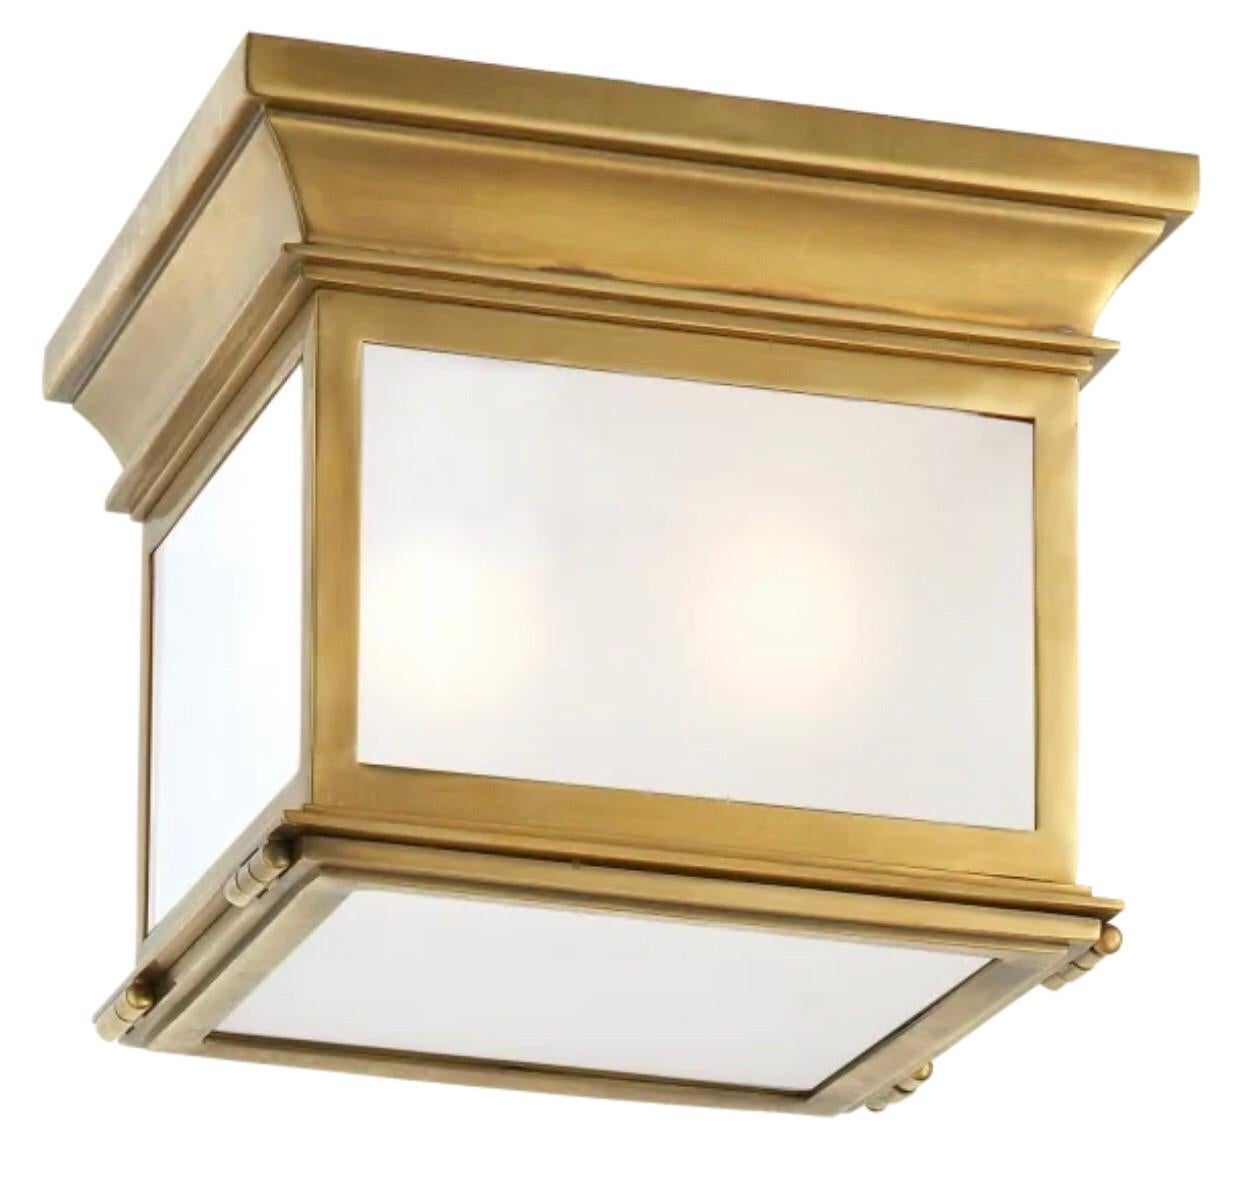 4 French Mid-Century Modern Neoclassical Style sober, antiqued brass flush mount fixtures in a square form with frosted glass panels. Timeless and elegant. UL wired. Priced and Sold Individually. 

The pieces can be customized with a bronze finish